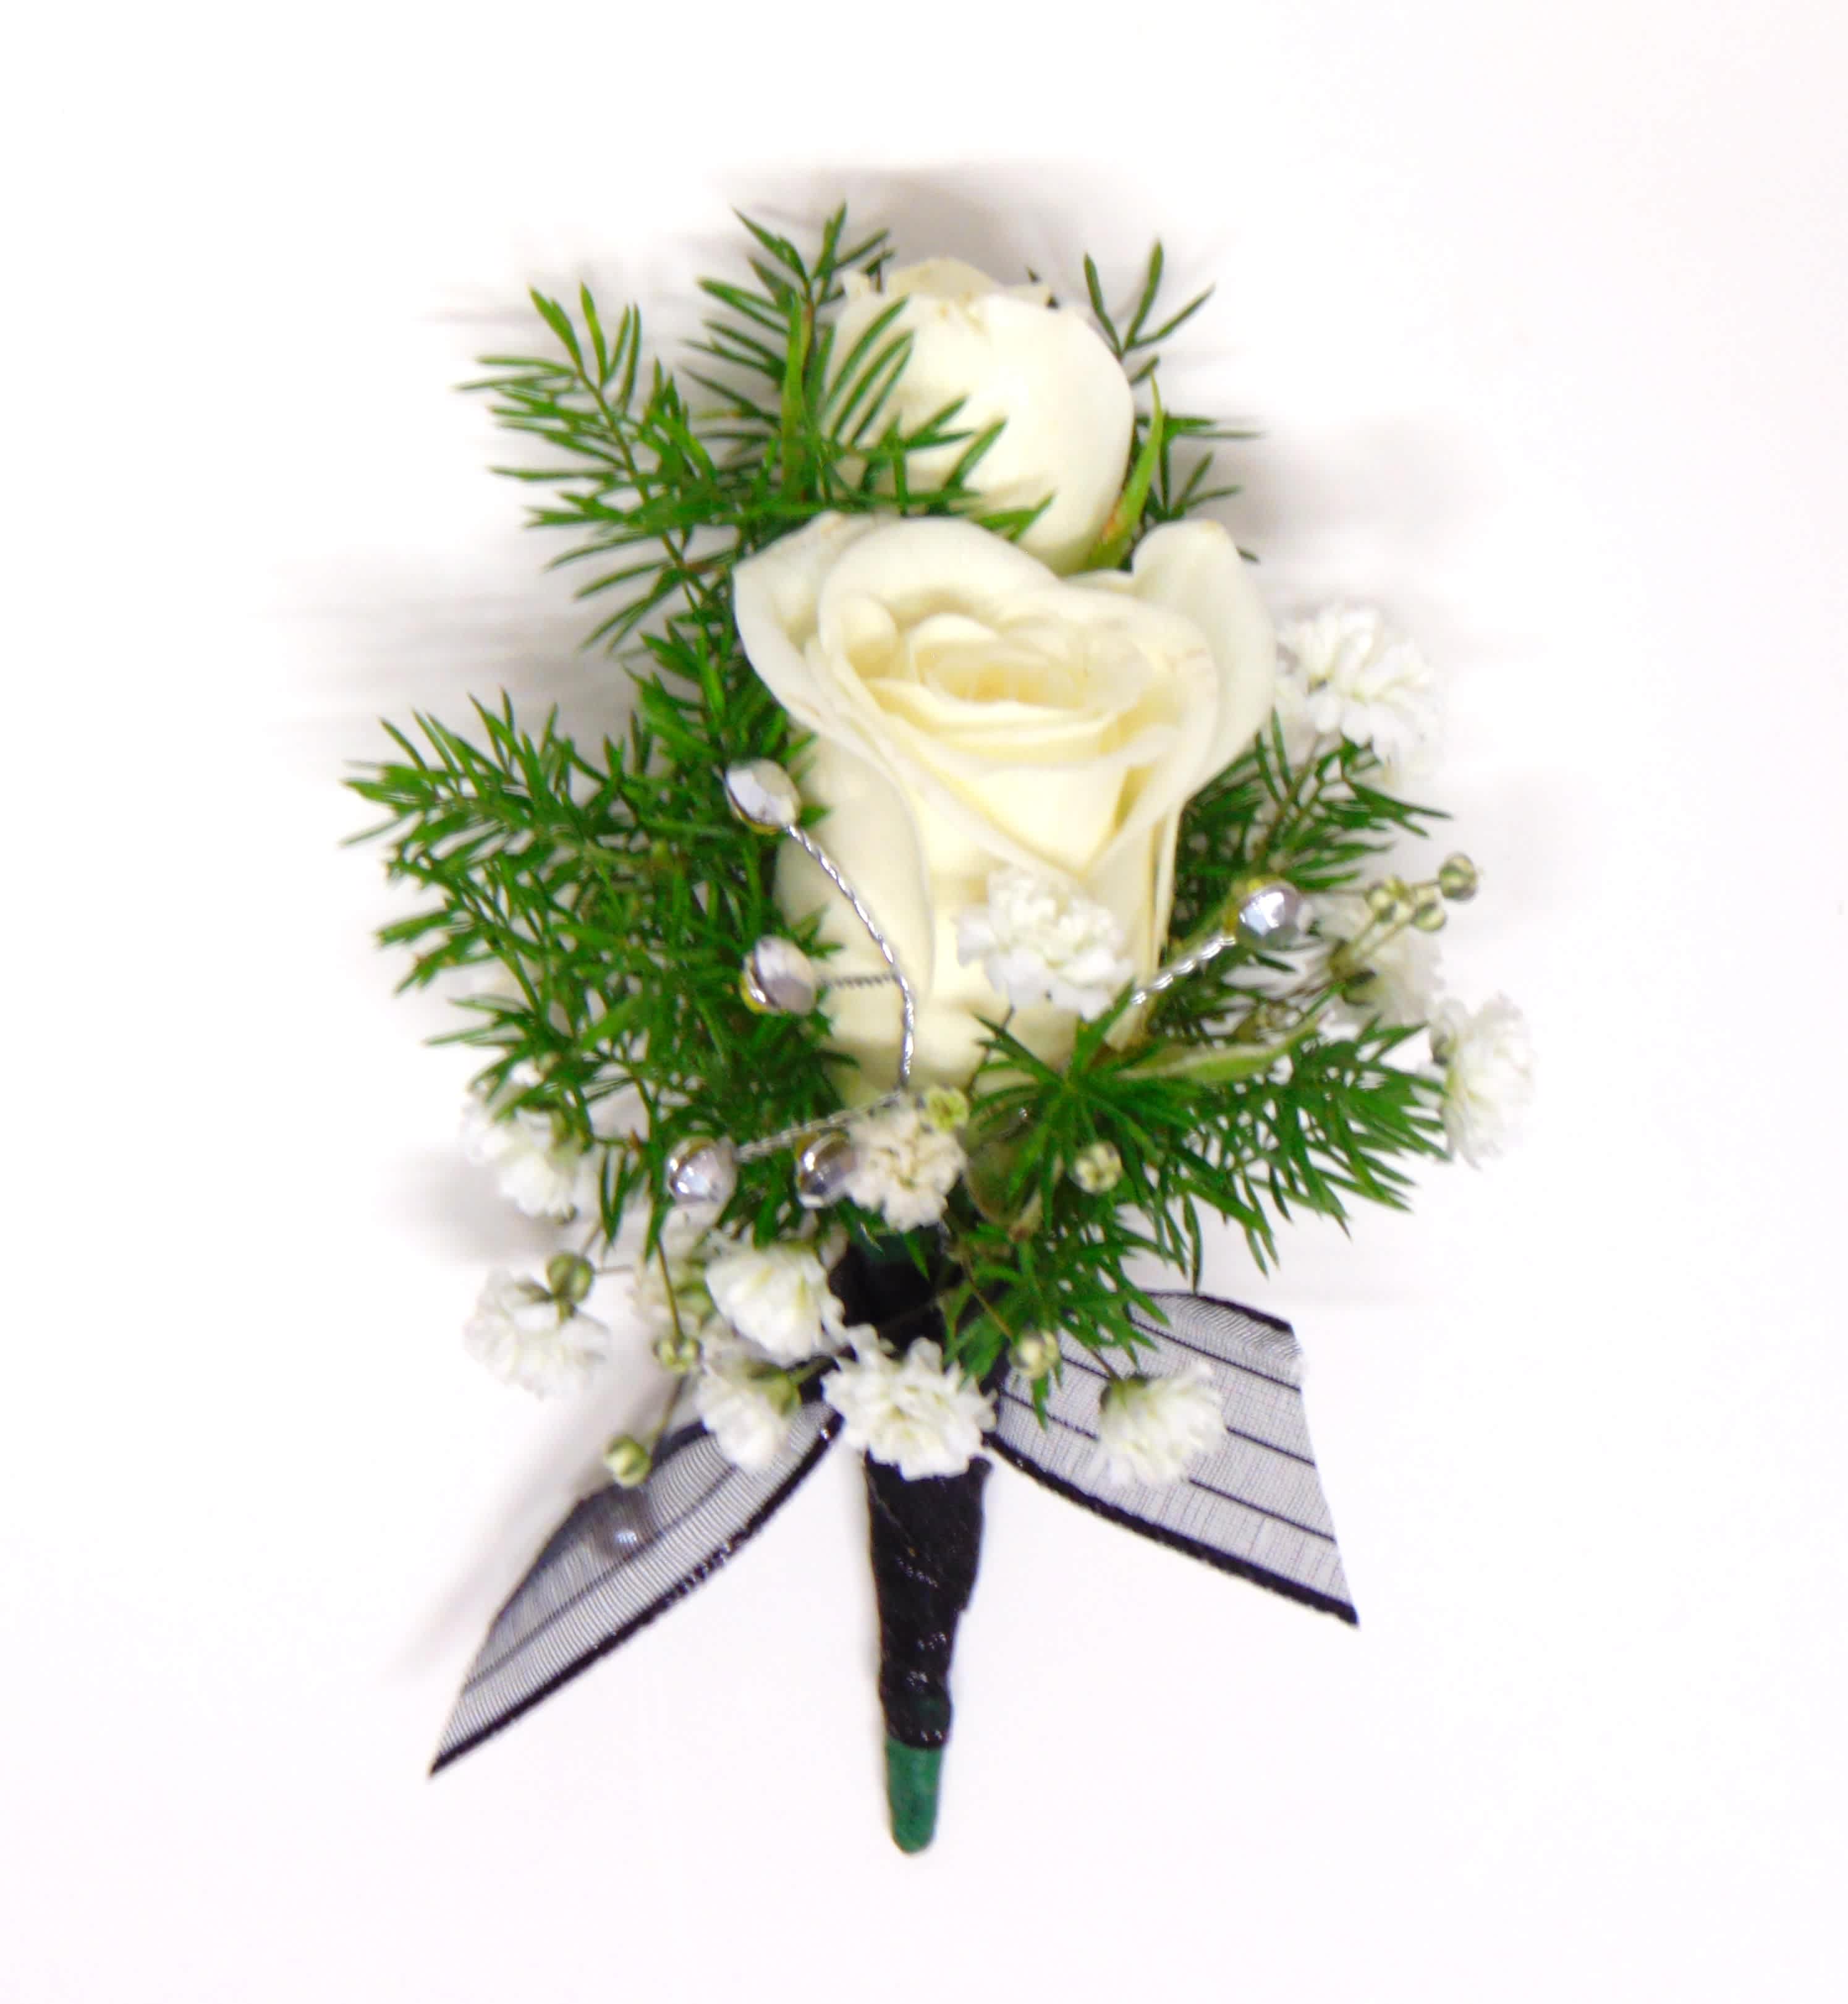 Double White Spray Rose &amp; Black/Silver Boutonniere - Two white spray roses,silver bling, baby's breath, ming fern and black ribbon wrap. Includes boutonniere box.